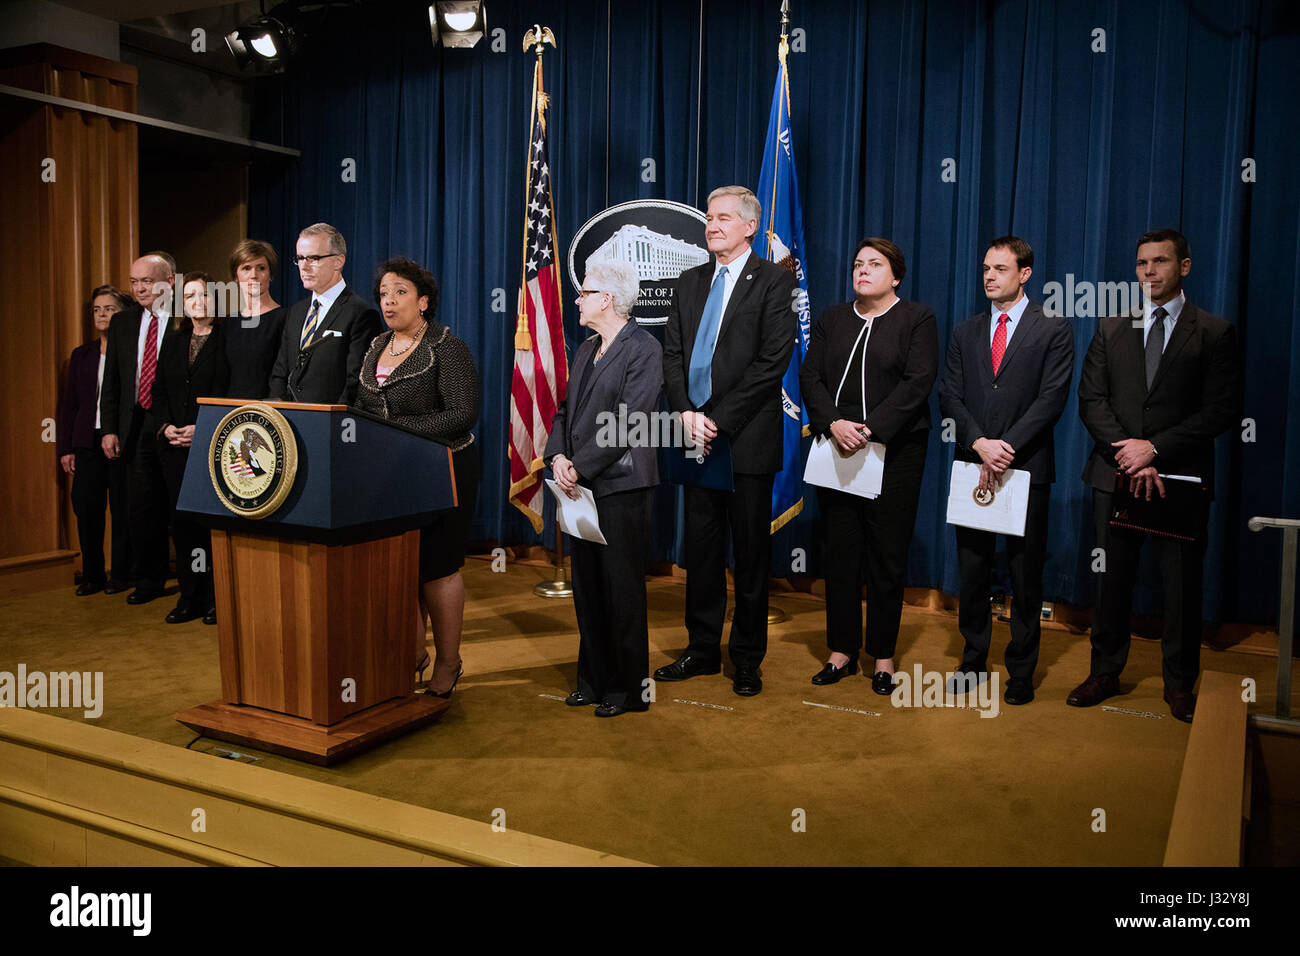 011117: Washington, DC - CBP Attends Press Conference at the Department Of Justice - Volkswagen Emissions Investigation.  Announcement was made by Attorney General Loretta E. Lynch seen here speaking.  Announcements were also made by EPA Administrator Gina McCarthy and Assistant Administrator Cynthia Giles, Deputy Attorney General Sally Q. Yates, FBI Deputy Director Andrew McCabe, Acting Deputy Secretary Russell C. Deyo for the Department of Homeland Security, U.S. Attorney Barbara L. McQuade of the Eastern District of Michigan, Assistant Attorney General Leslie R. Caldwell of the Justice Depa Stock Photo